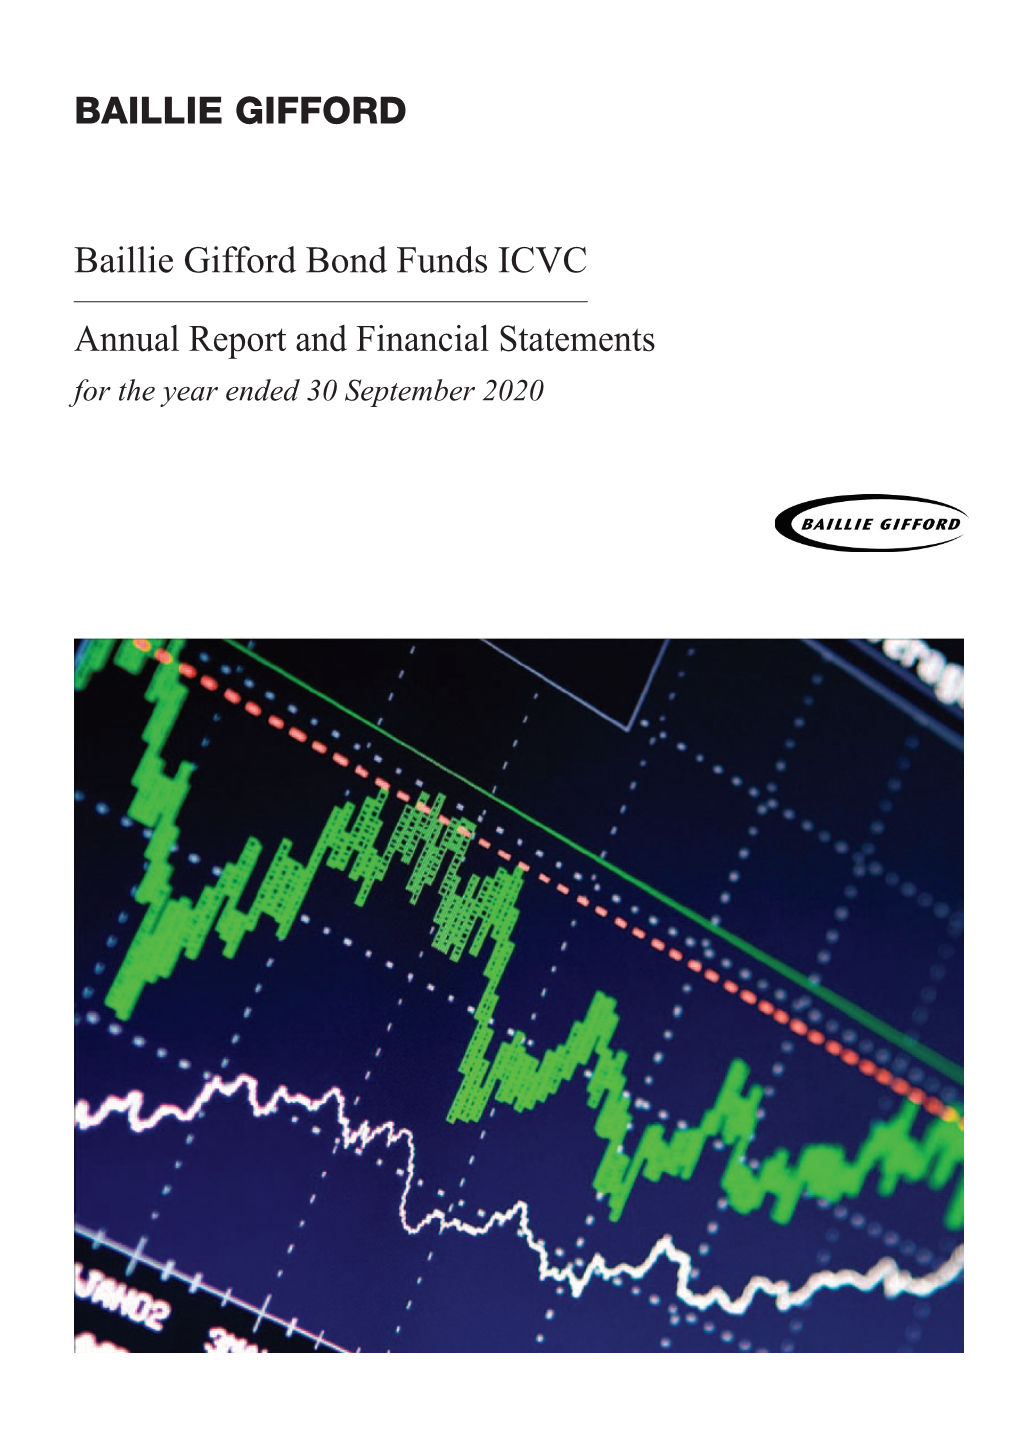 Baillie Gifford Bond Funds ICVC Annual Report and Financial Statements for the Year Ended 30 September 2020